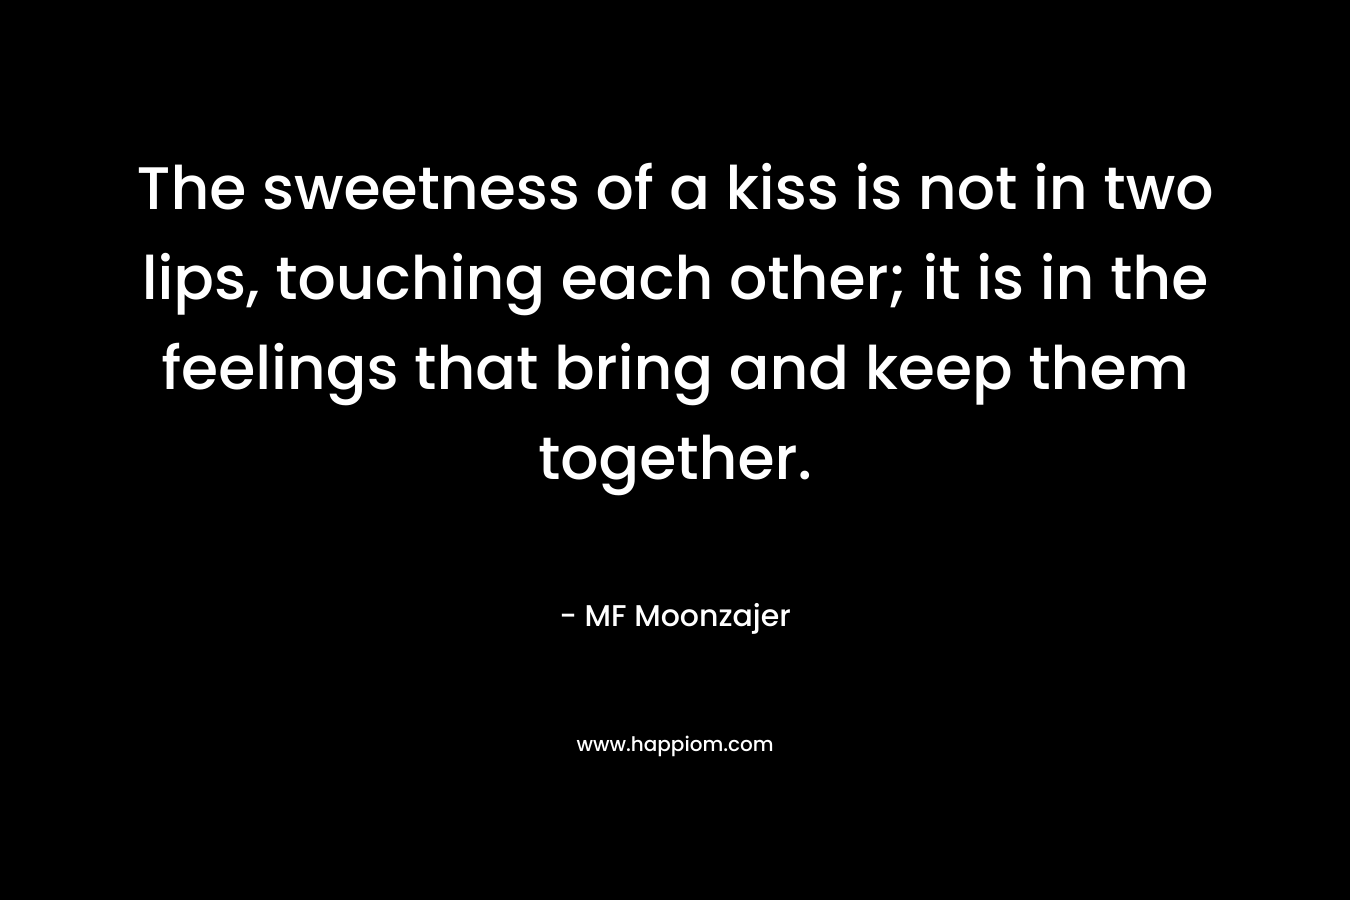 The sweetness of a kiss is not in two lips, touching each other; it is in the feelings that bring and keep them together.